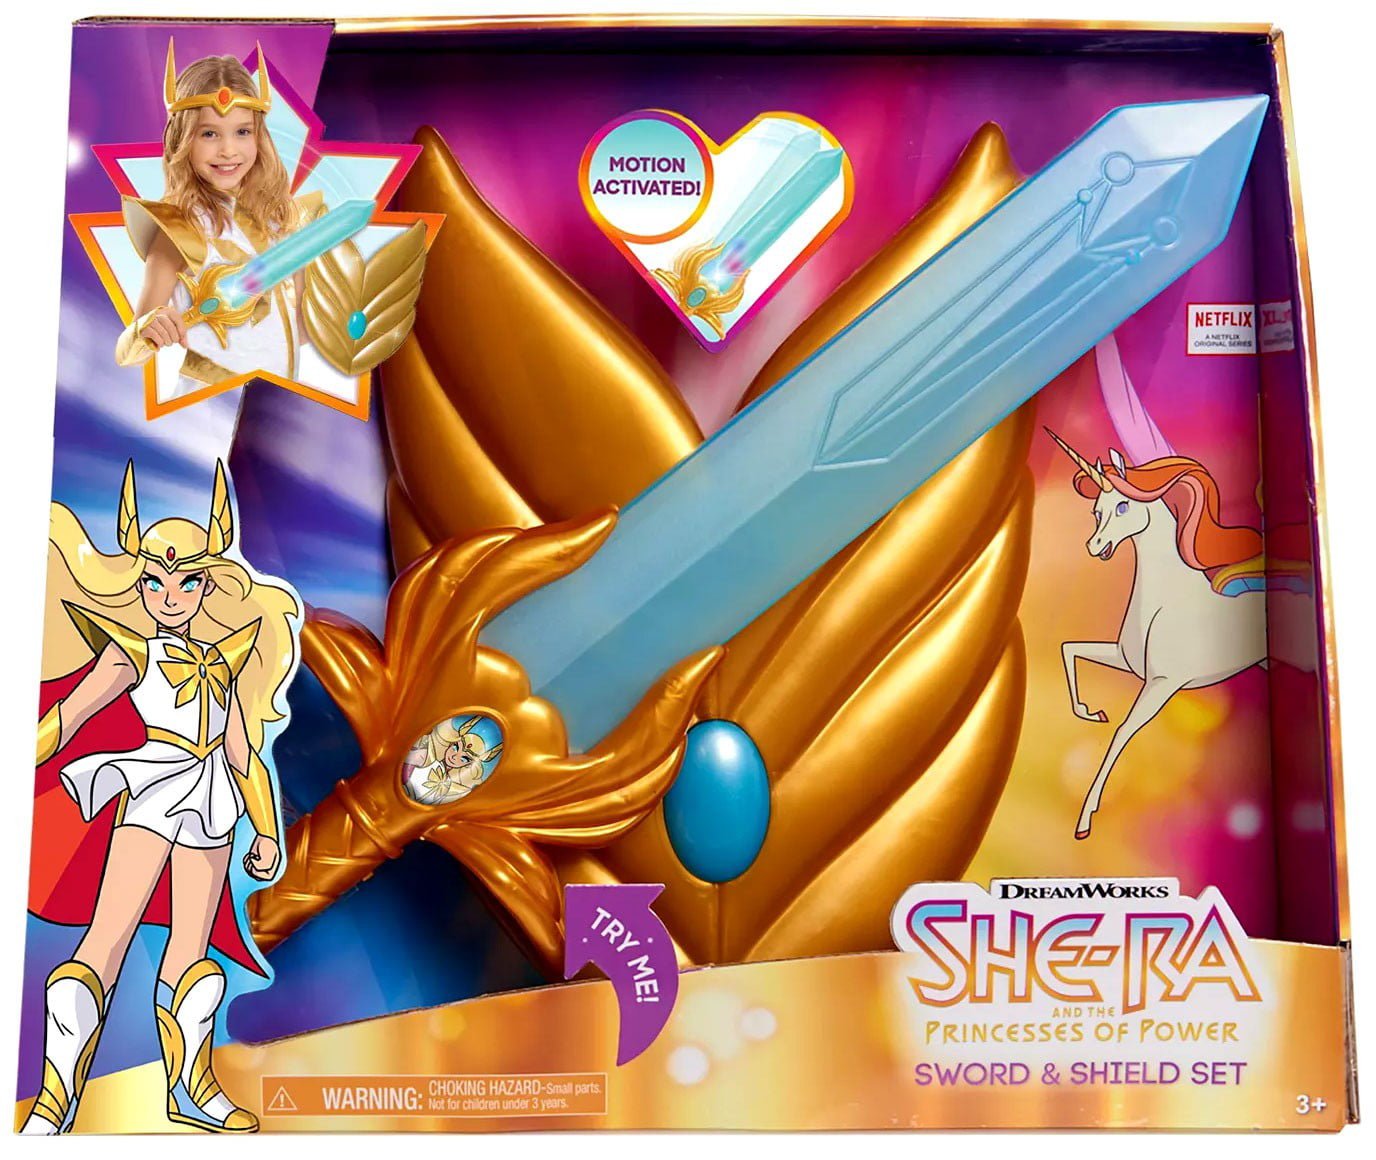 Dreamworks She-ra And The Princesses Of Power Dress Up Set Fits Sizws 4-6x NEW 